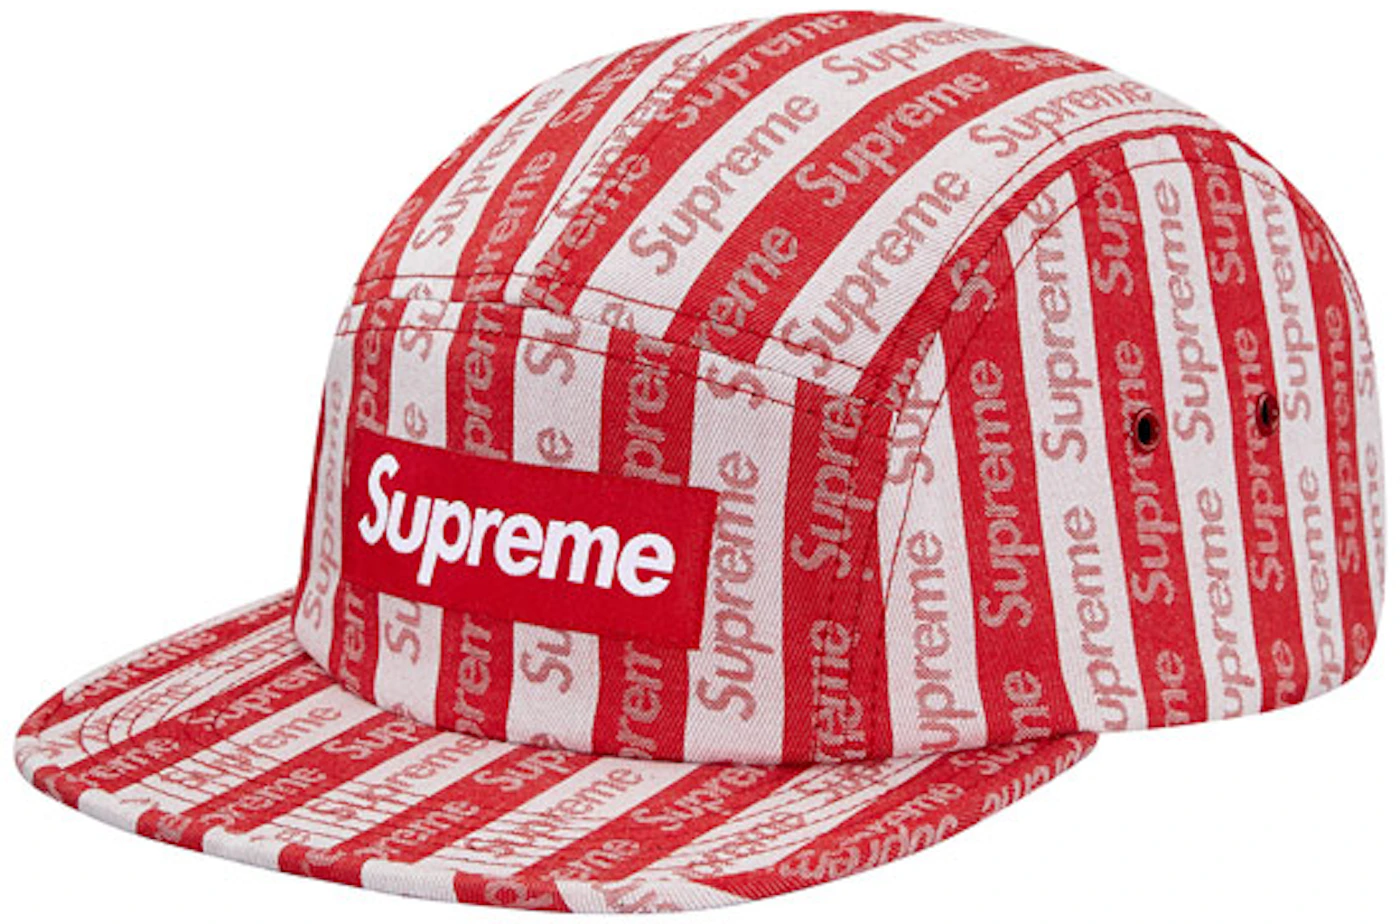 Jackowe's (almost) complete guide to spotting a fake camp cap :  r/supremeclothing